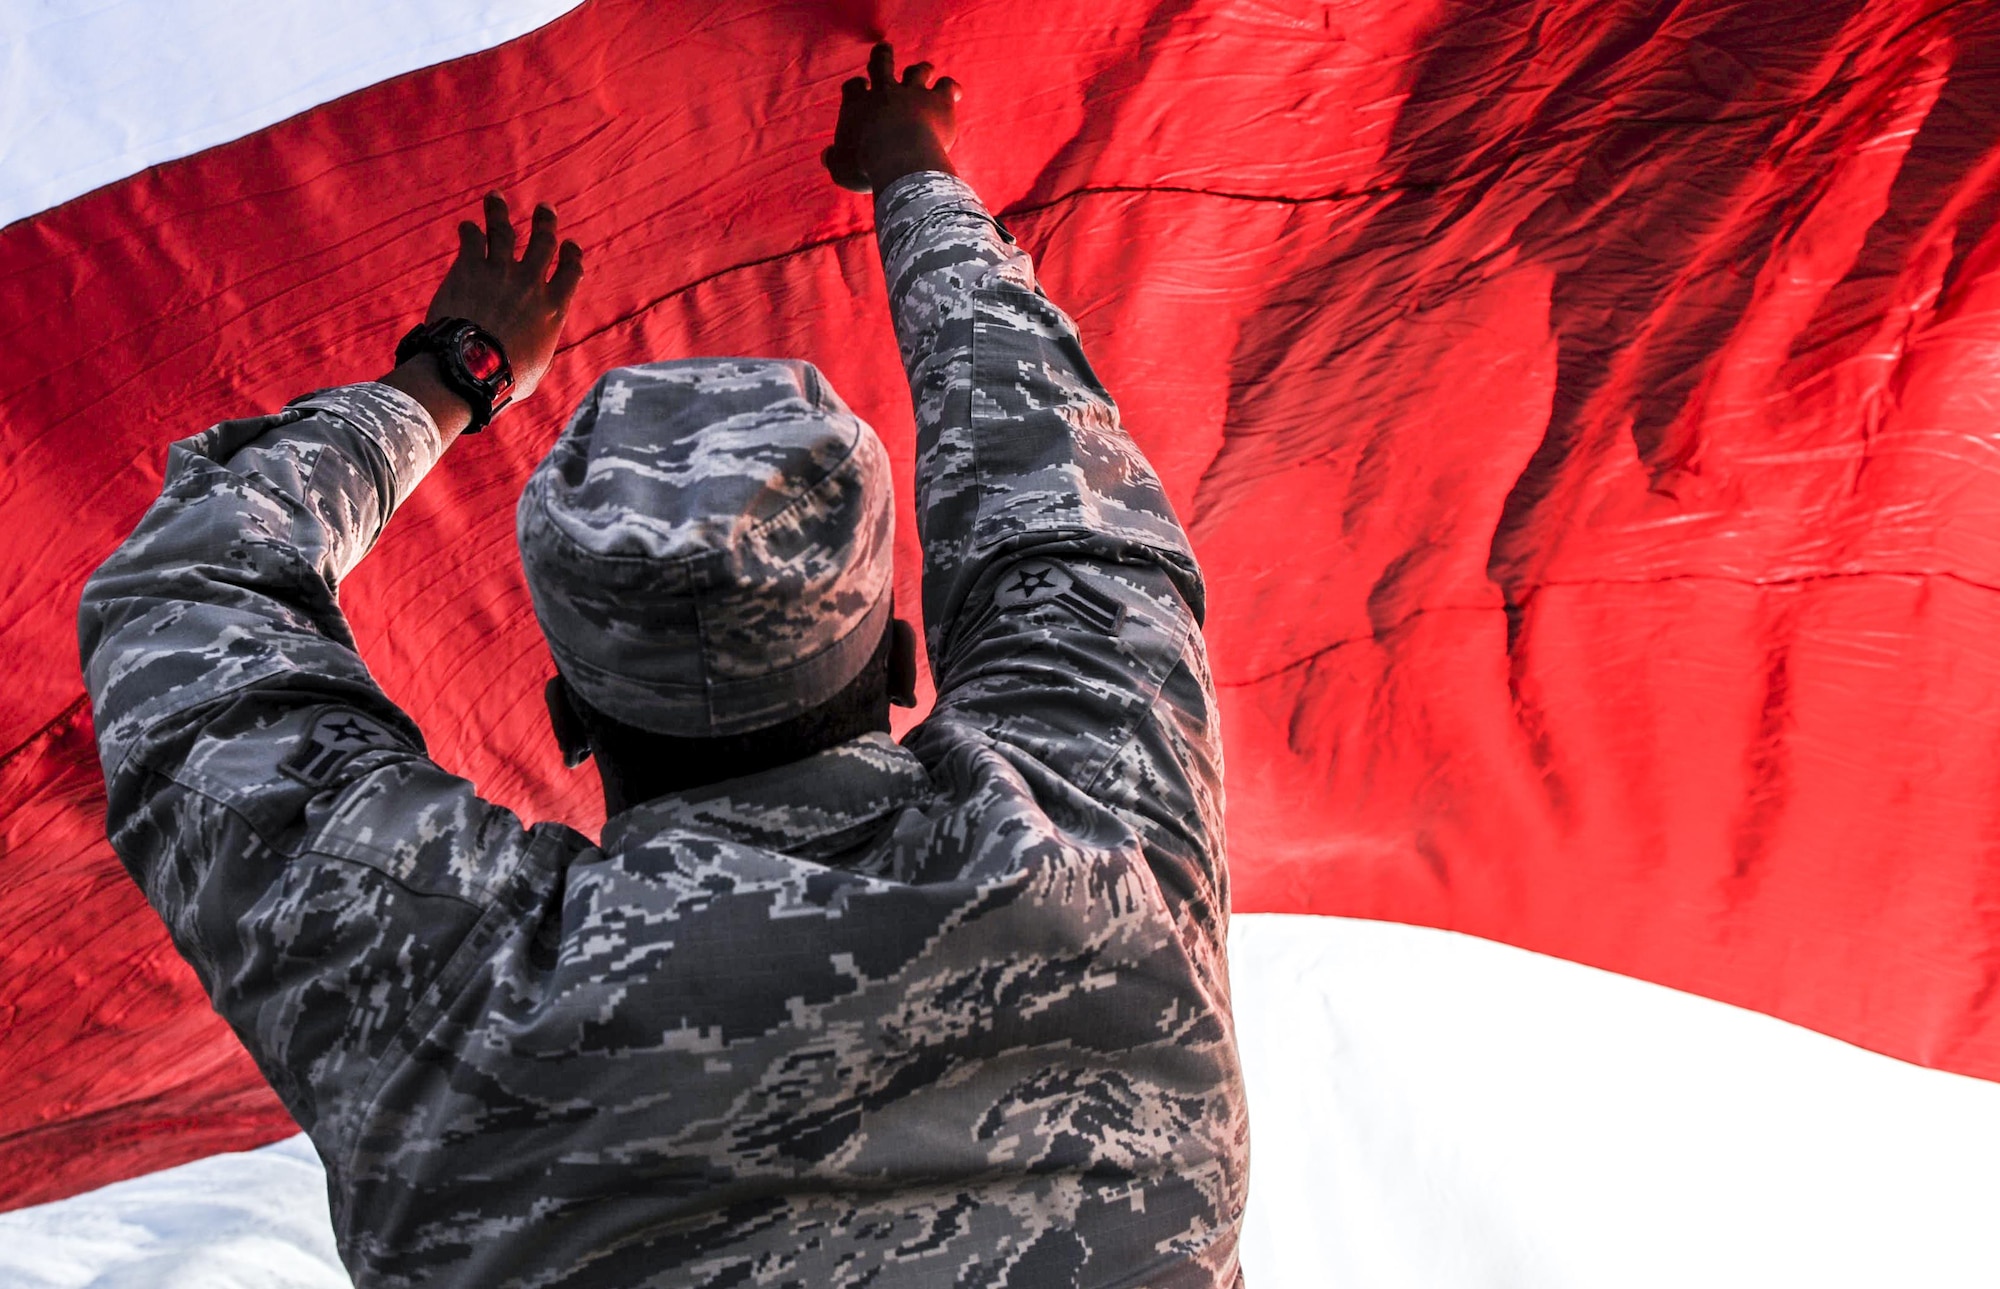 Airman 1st Class Corey Mitchell, 99th Air Base Wing Public Affairs broadcast engineer, holds up the American flag at Sam Boyd Stadium before the Las Vegas Bowl, Dec. 17, 2016. The Las Vegas Bowl featured the Houston Cougars facing off against the San Diego State Aztecs. (U.S. Air Force photo by Airman 1st Class Kevin Tanenbaum/Released)